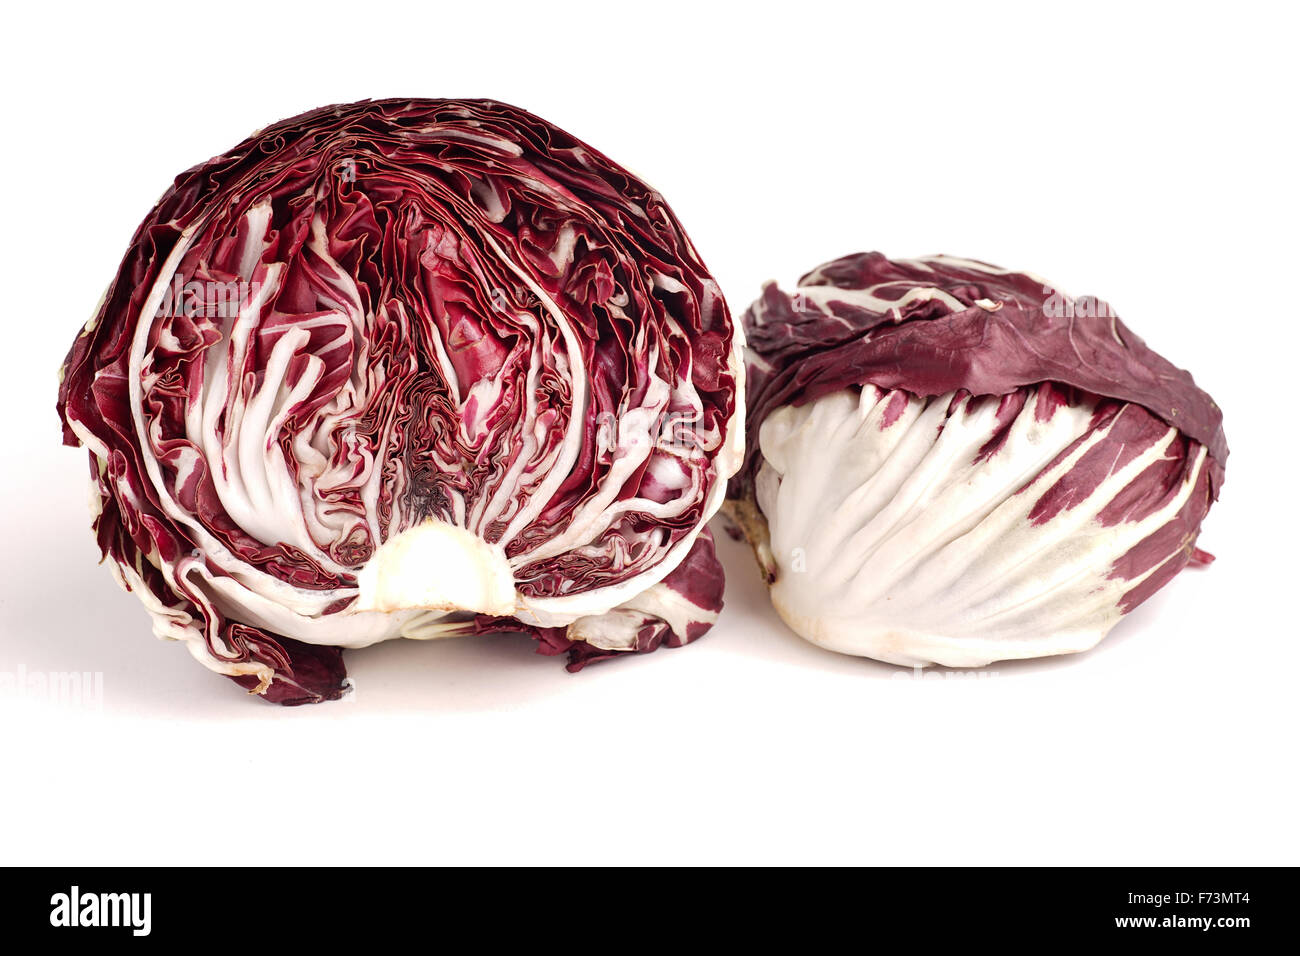 Fresh organic Radicchio Lettuce, ready for eating and cooking Stock Photo